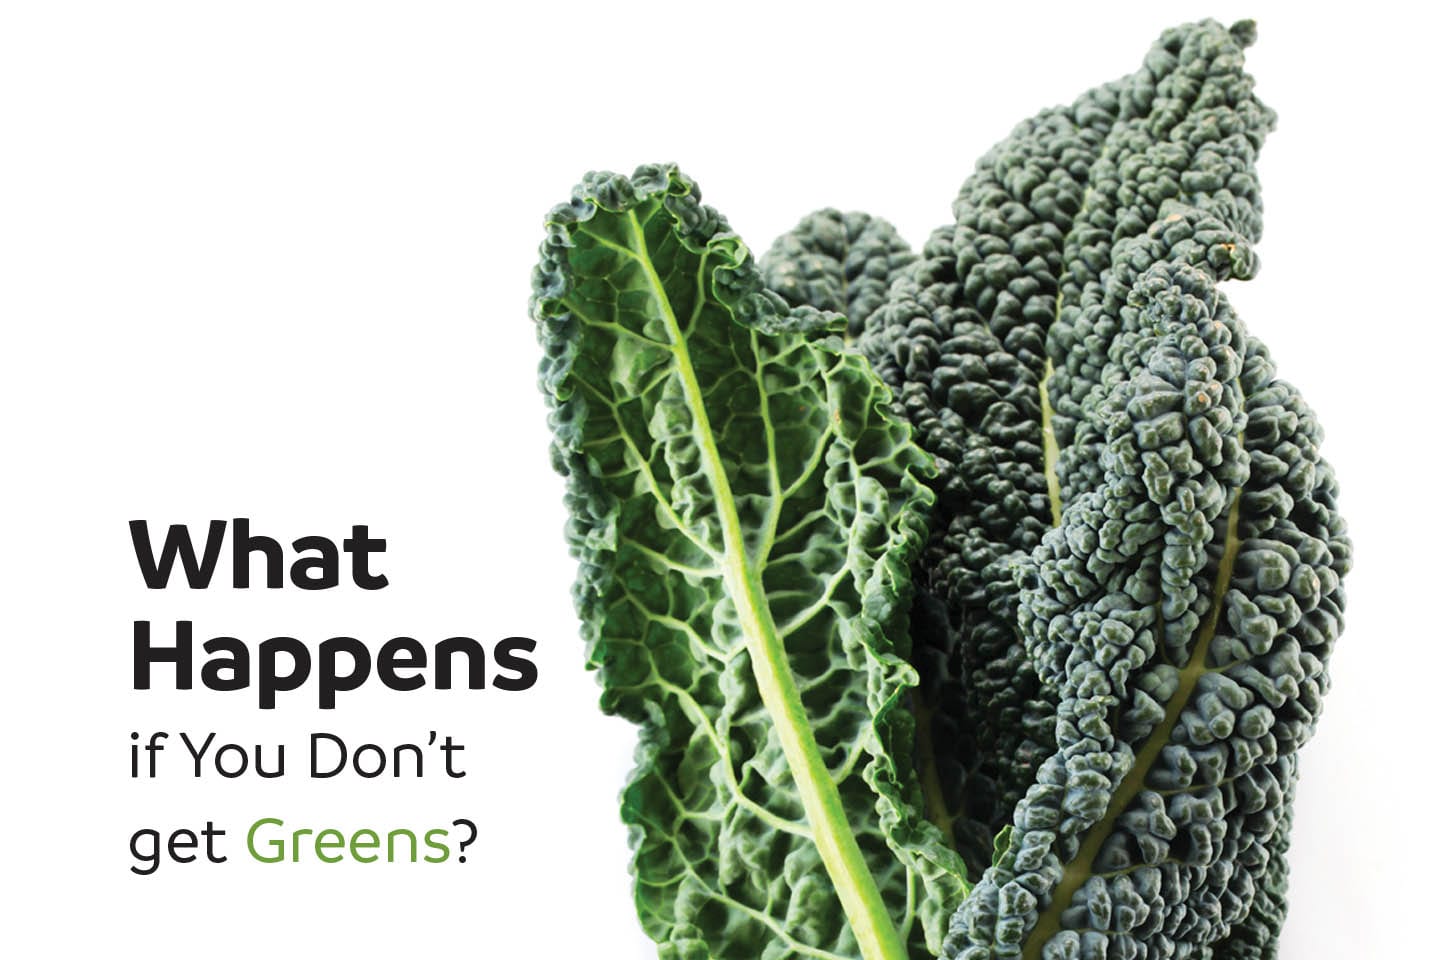 Graphic of text 'What Happens If You Don't Get Greens?' beside kale leaves 